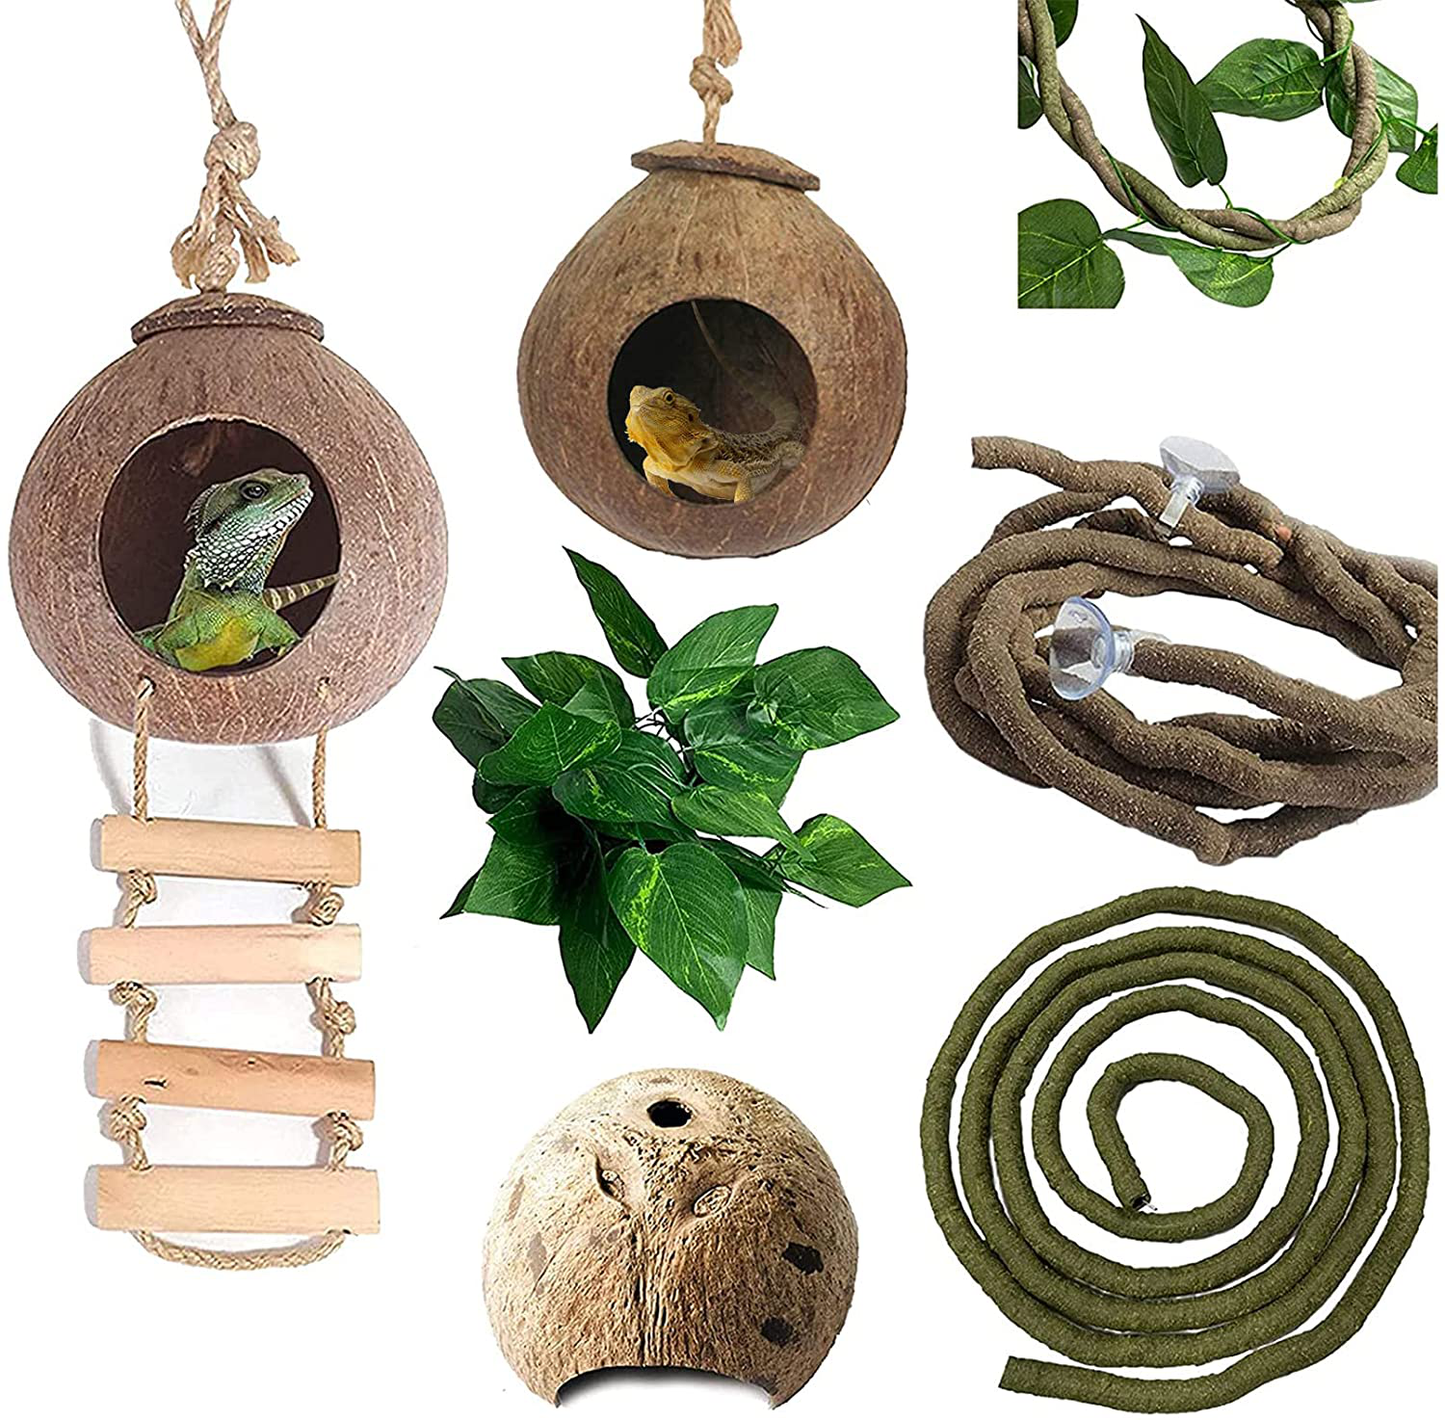 Kathson Lizard Coco Den with Ladder, Reptile Hideouts Gecko Coconut Husk Hut with Artificial Bendable Jungle Climbing Vines for Chameleon, Lizards, Gecko, Snakes to Hide Perch and Play